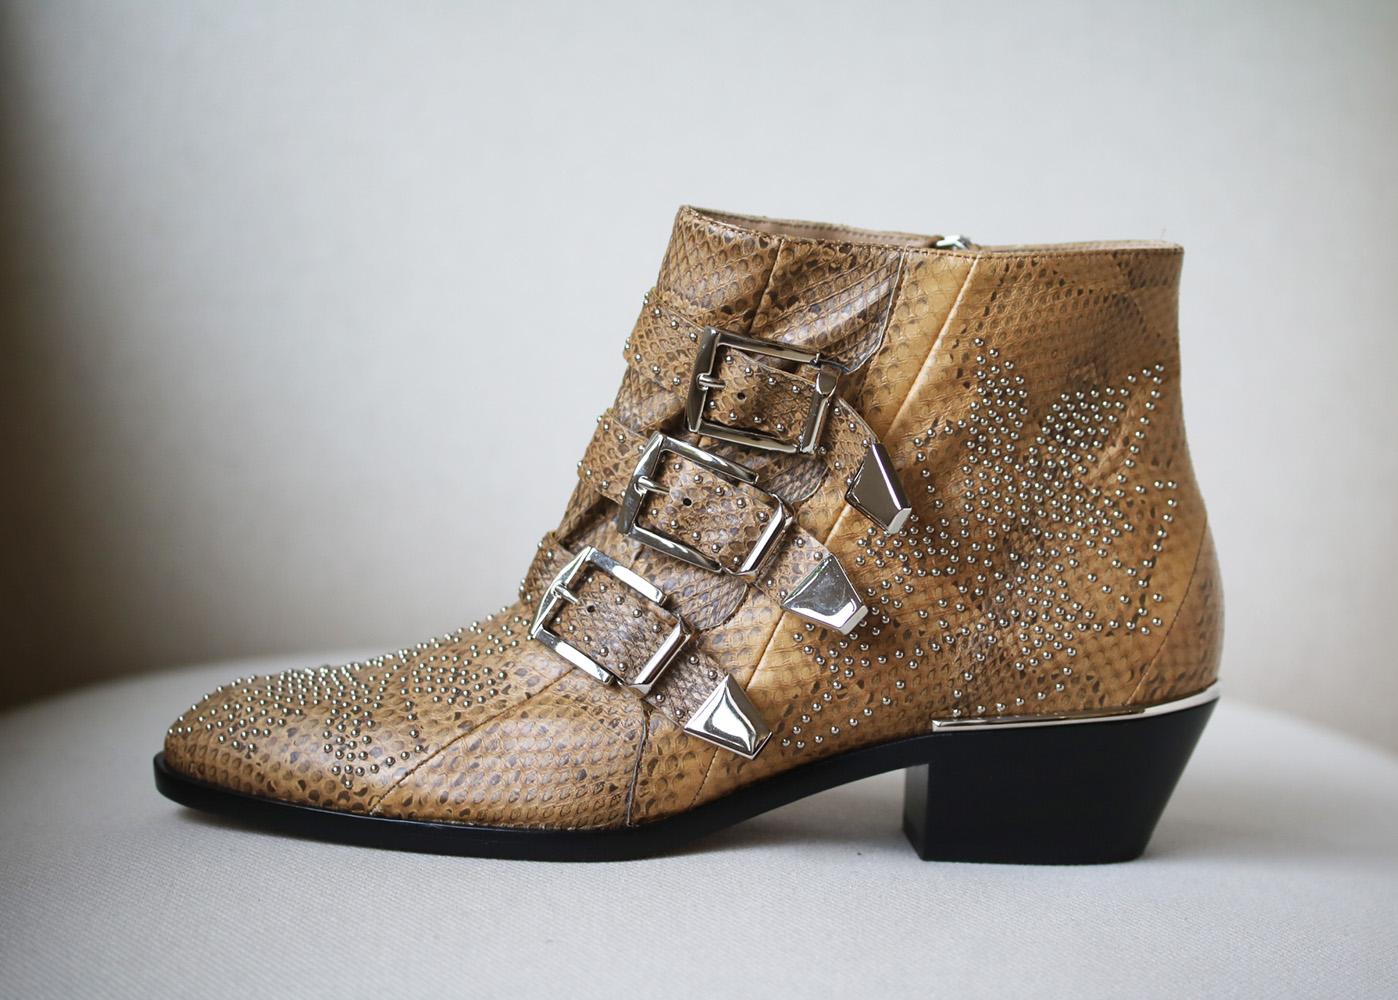 Chloé's 'Susanna' boots are one of the label's most sought-after designs. Updated in tonal-sand watersnake - a chic alternative to black and just as versatile - this pair is punctuated with silver studs and three buckled straps. Heel measures